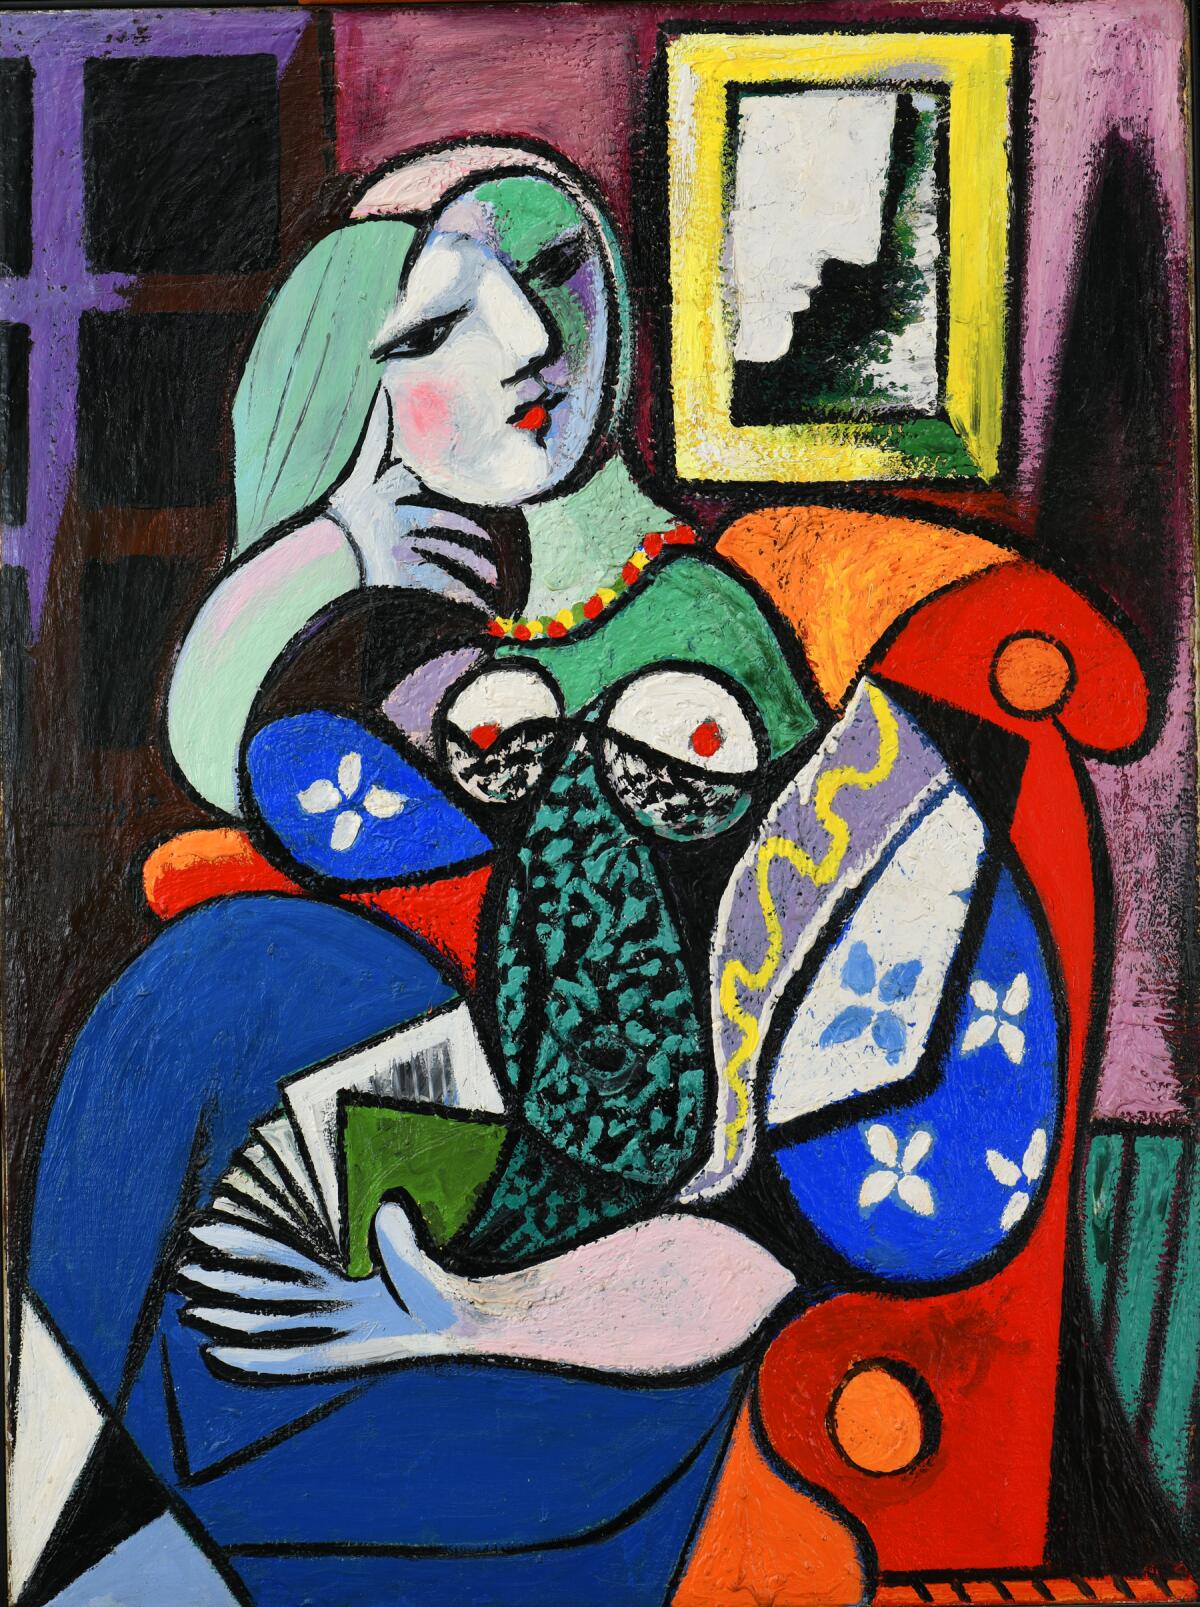 An abstract painting of a seated woman, her head resting on her hand as she pages a book, rendered in bright colors.